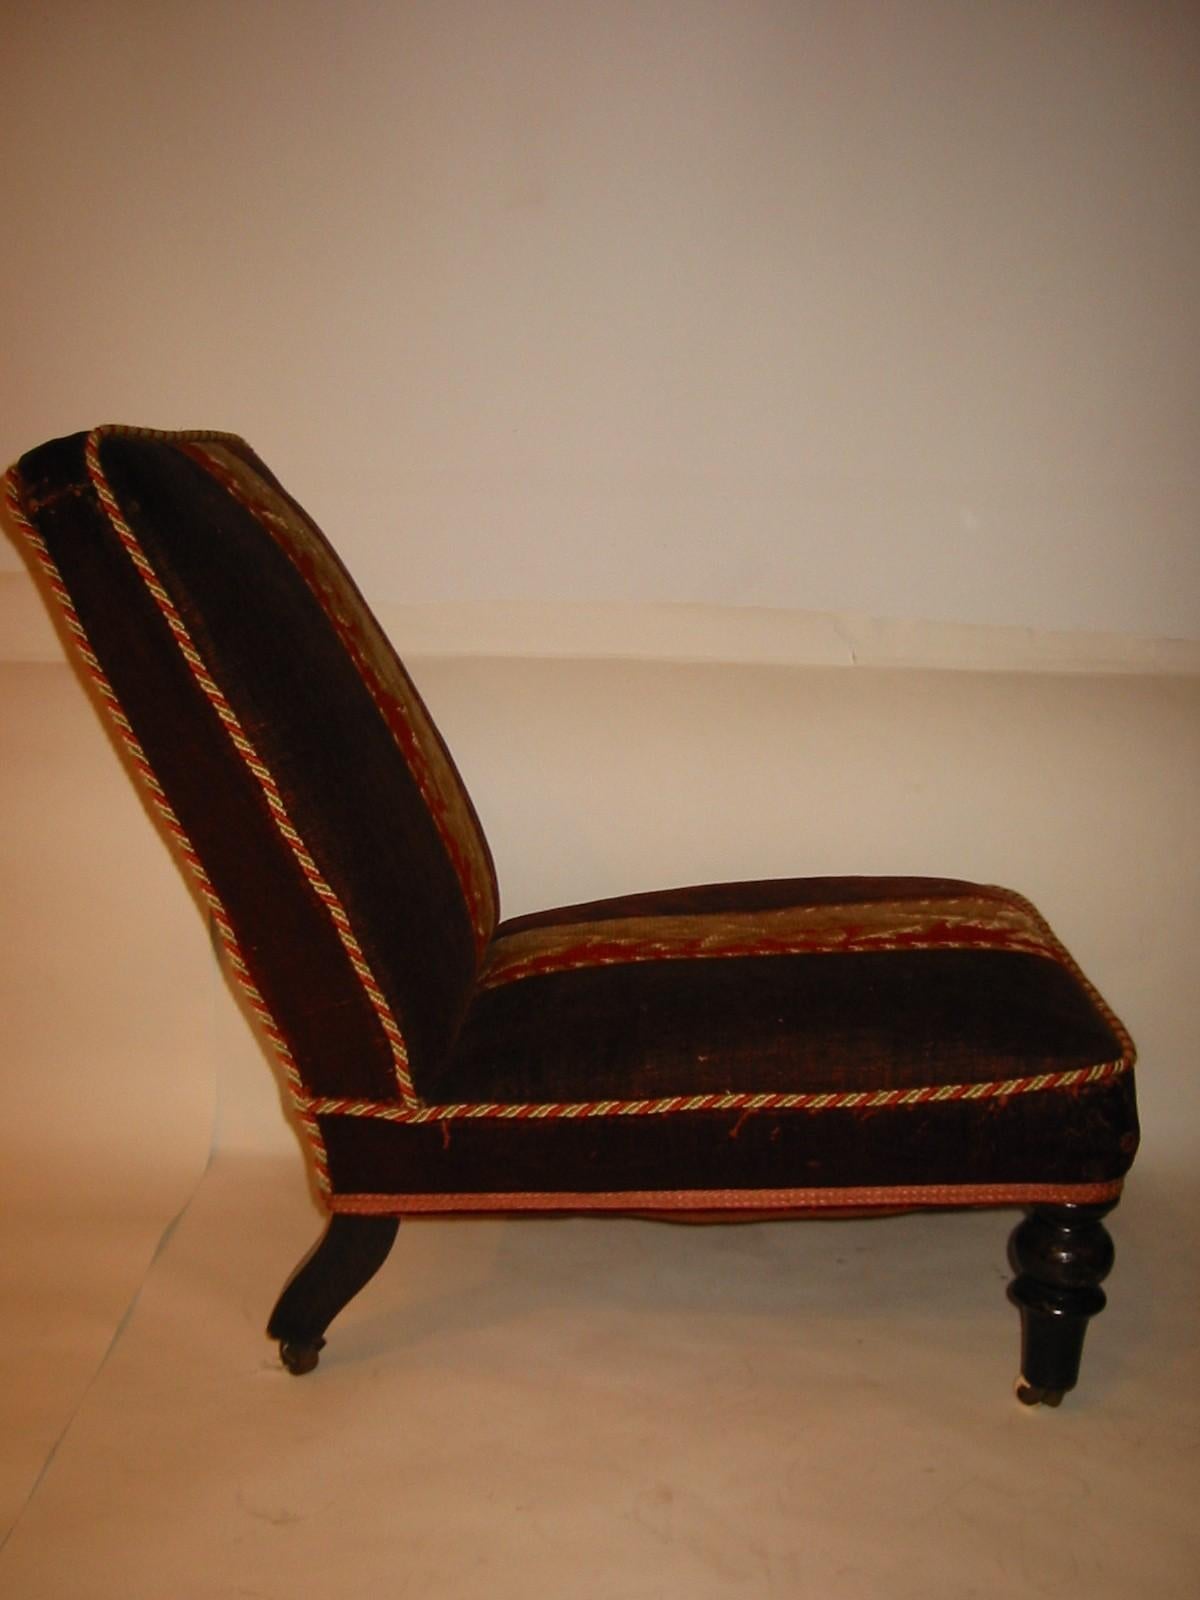 A small Victorian low back reclining chair. Upholstered in original velvet with a needle point accent in the middle.

Property from esteemed interior designer Juan Montoya. Juan Montoya is one of the most acclaimed and prolific interior designers